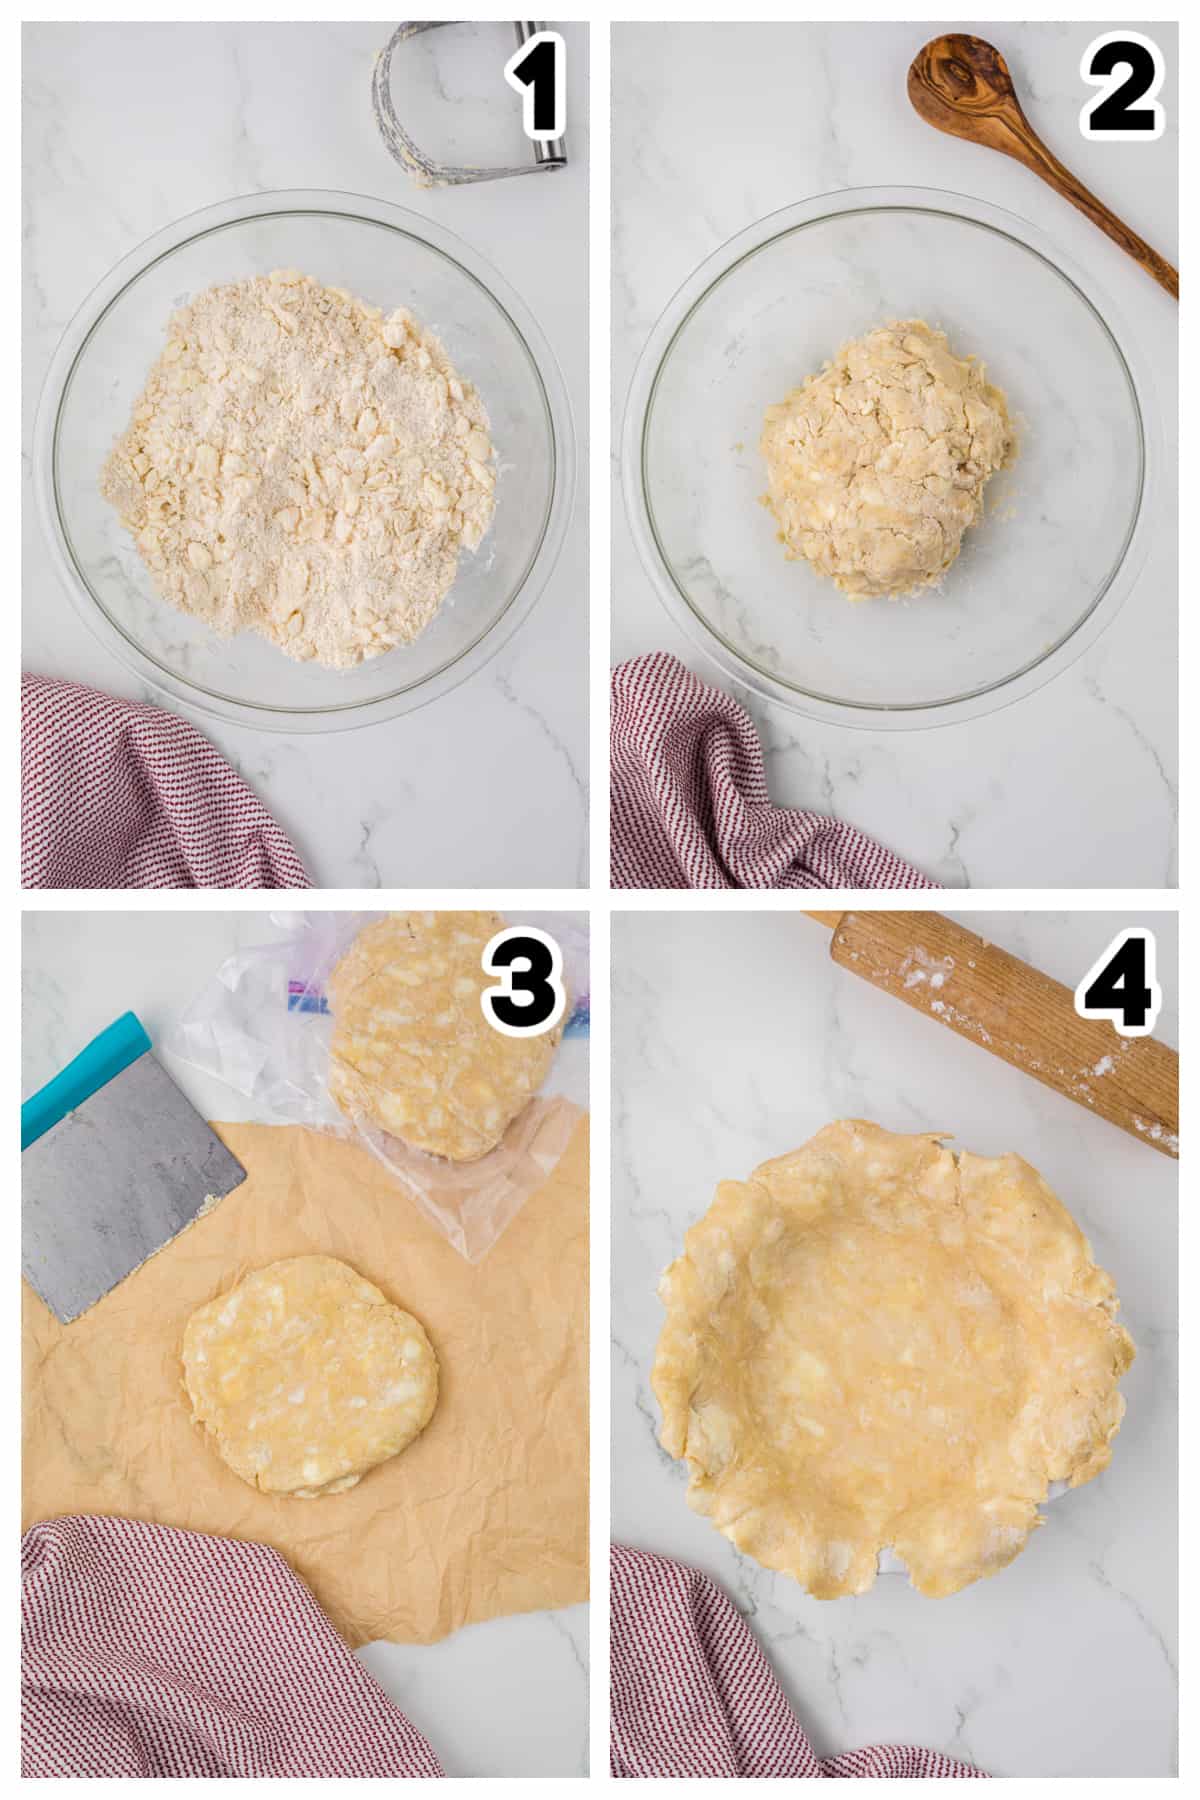 Collage showing step by step photos for making perfect pie crust.